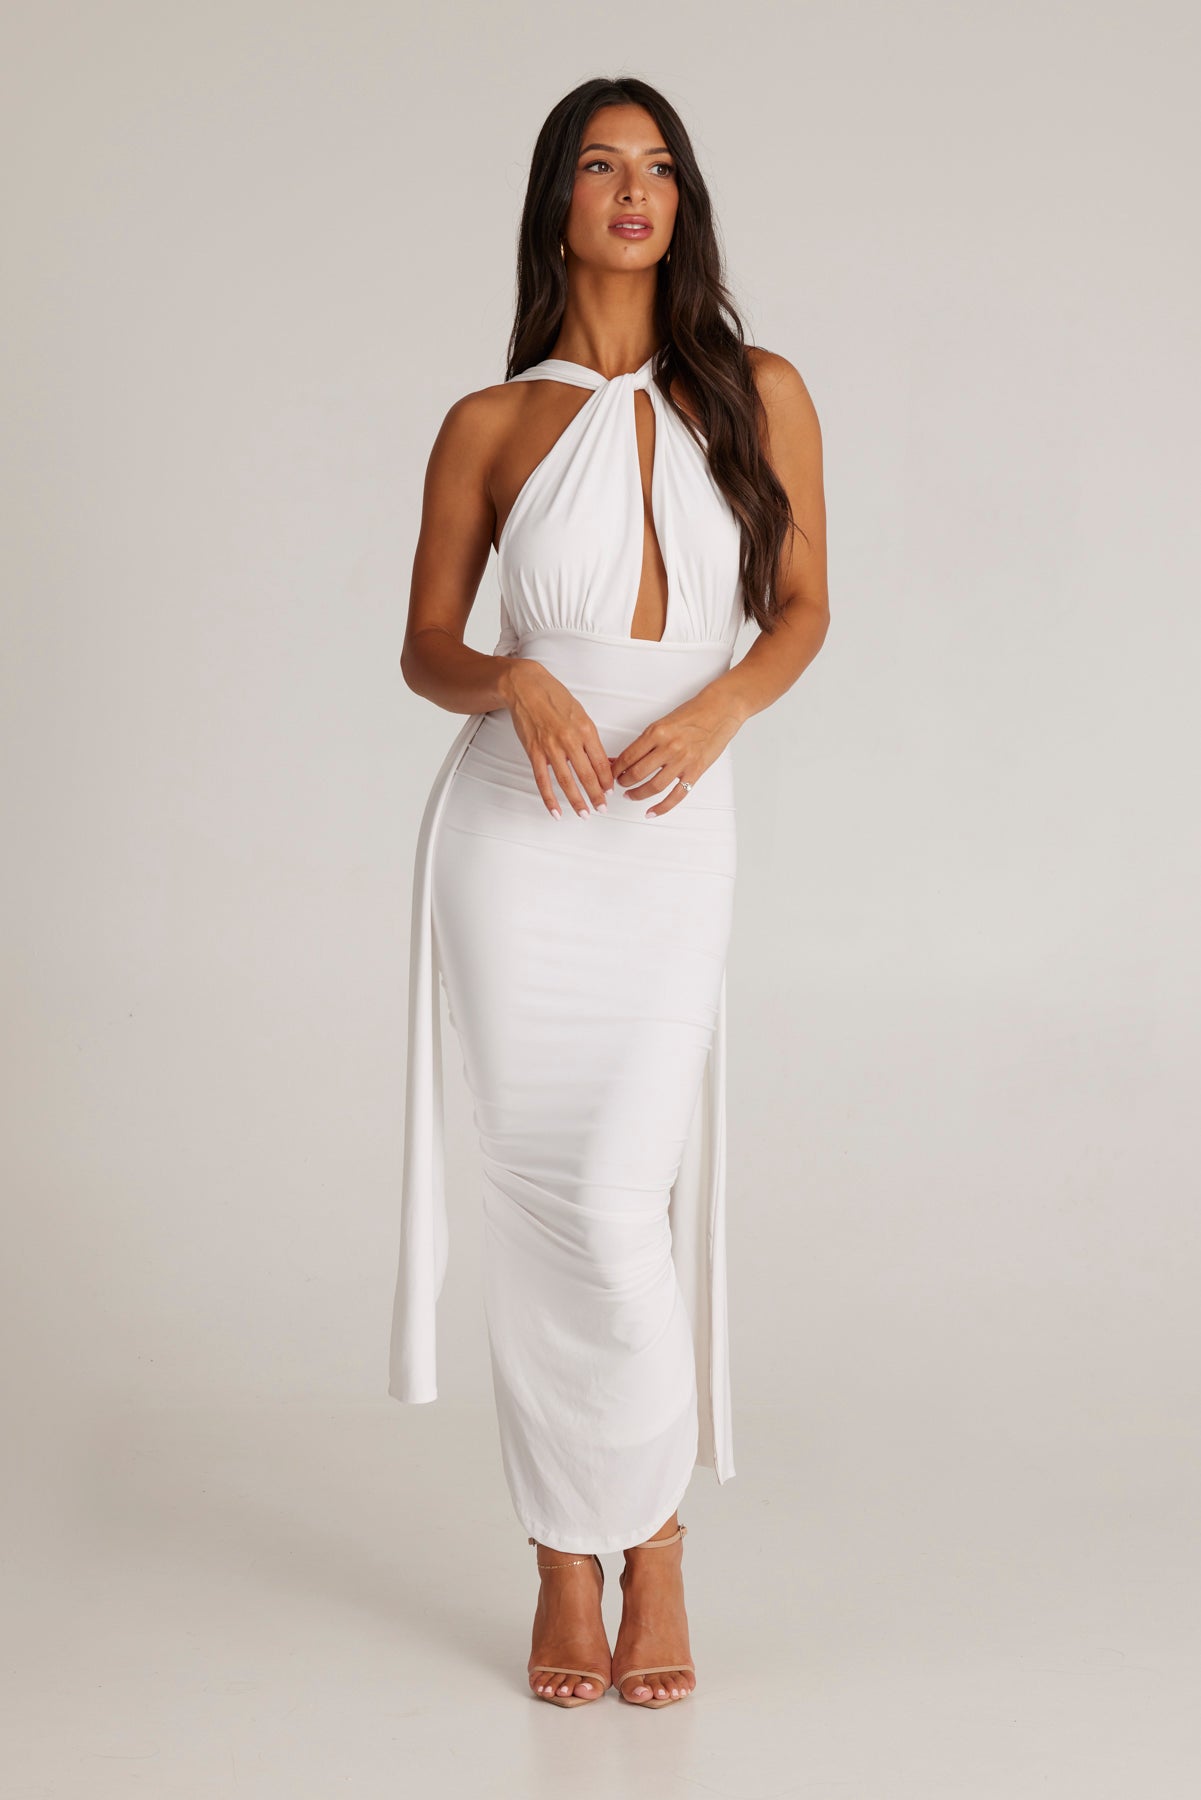 MÉLANI The Label MELROSE White Multi Tie Plunge Form Fitted Midi Dress